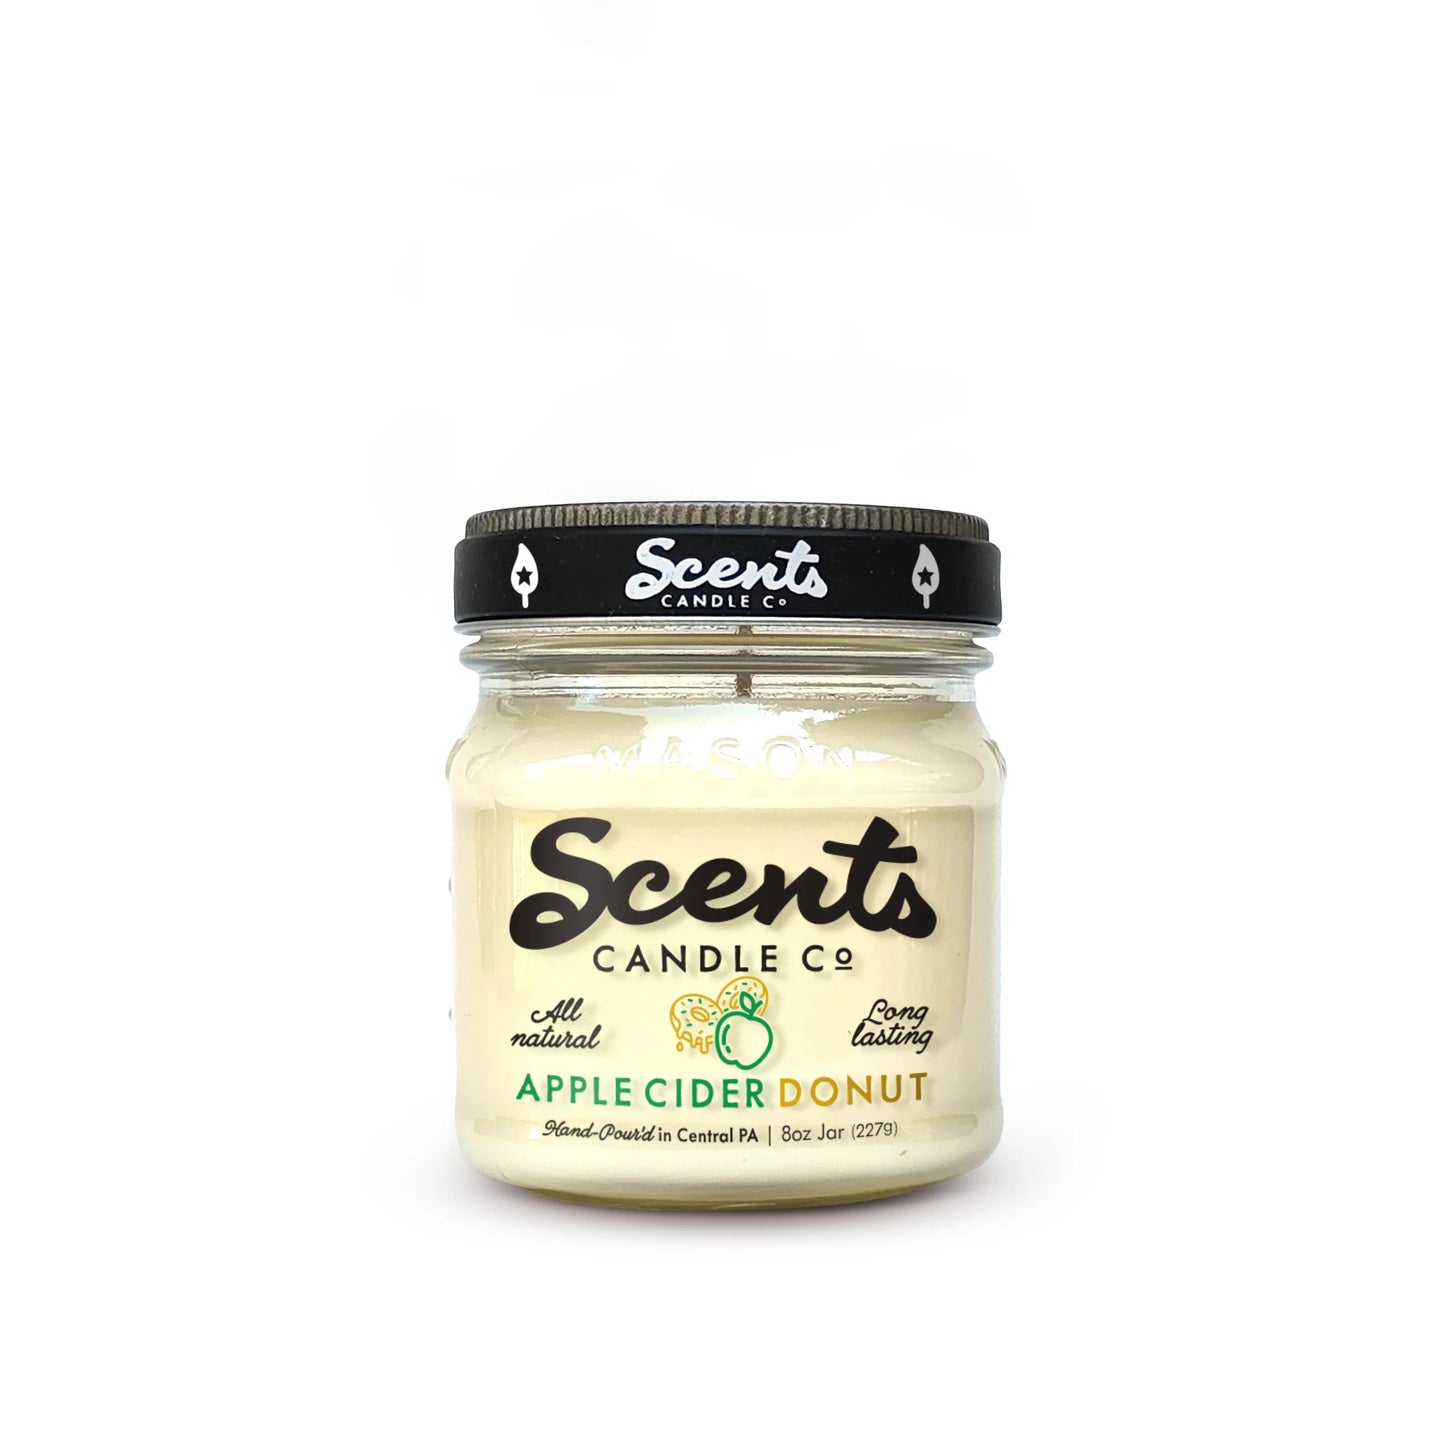 Scents Candle Co. Apple Cider Donut Soy Wax Candles